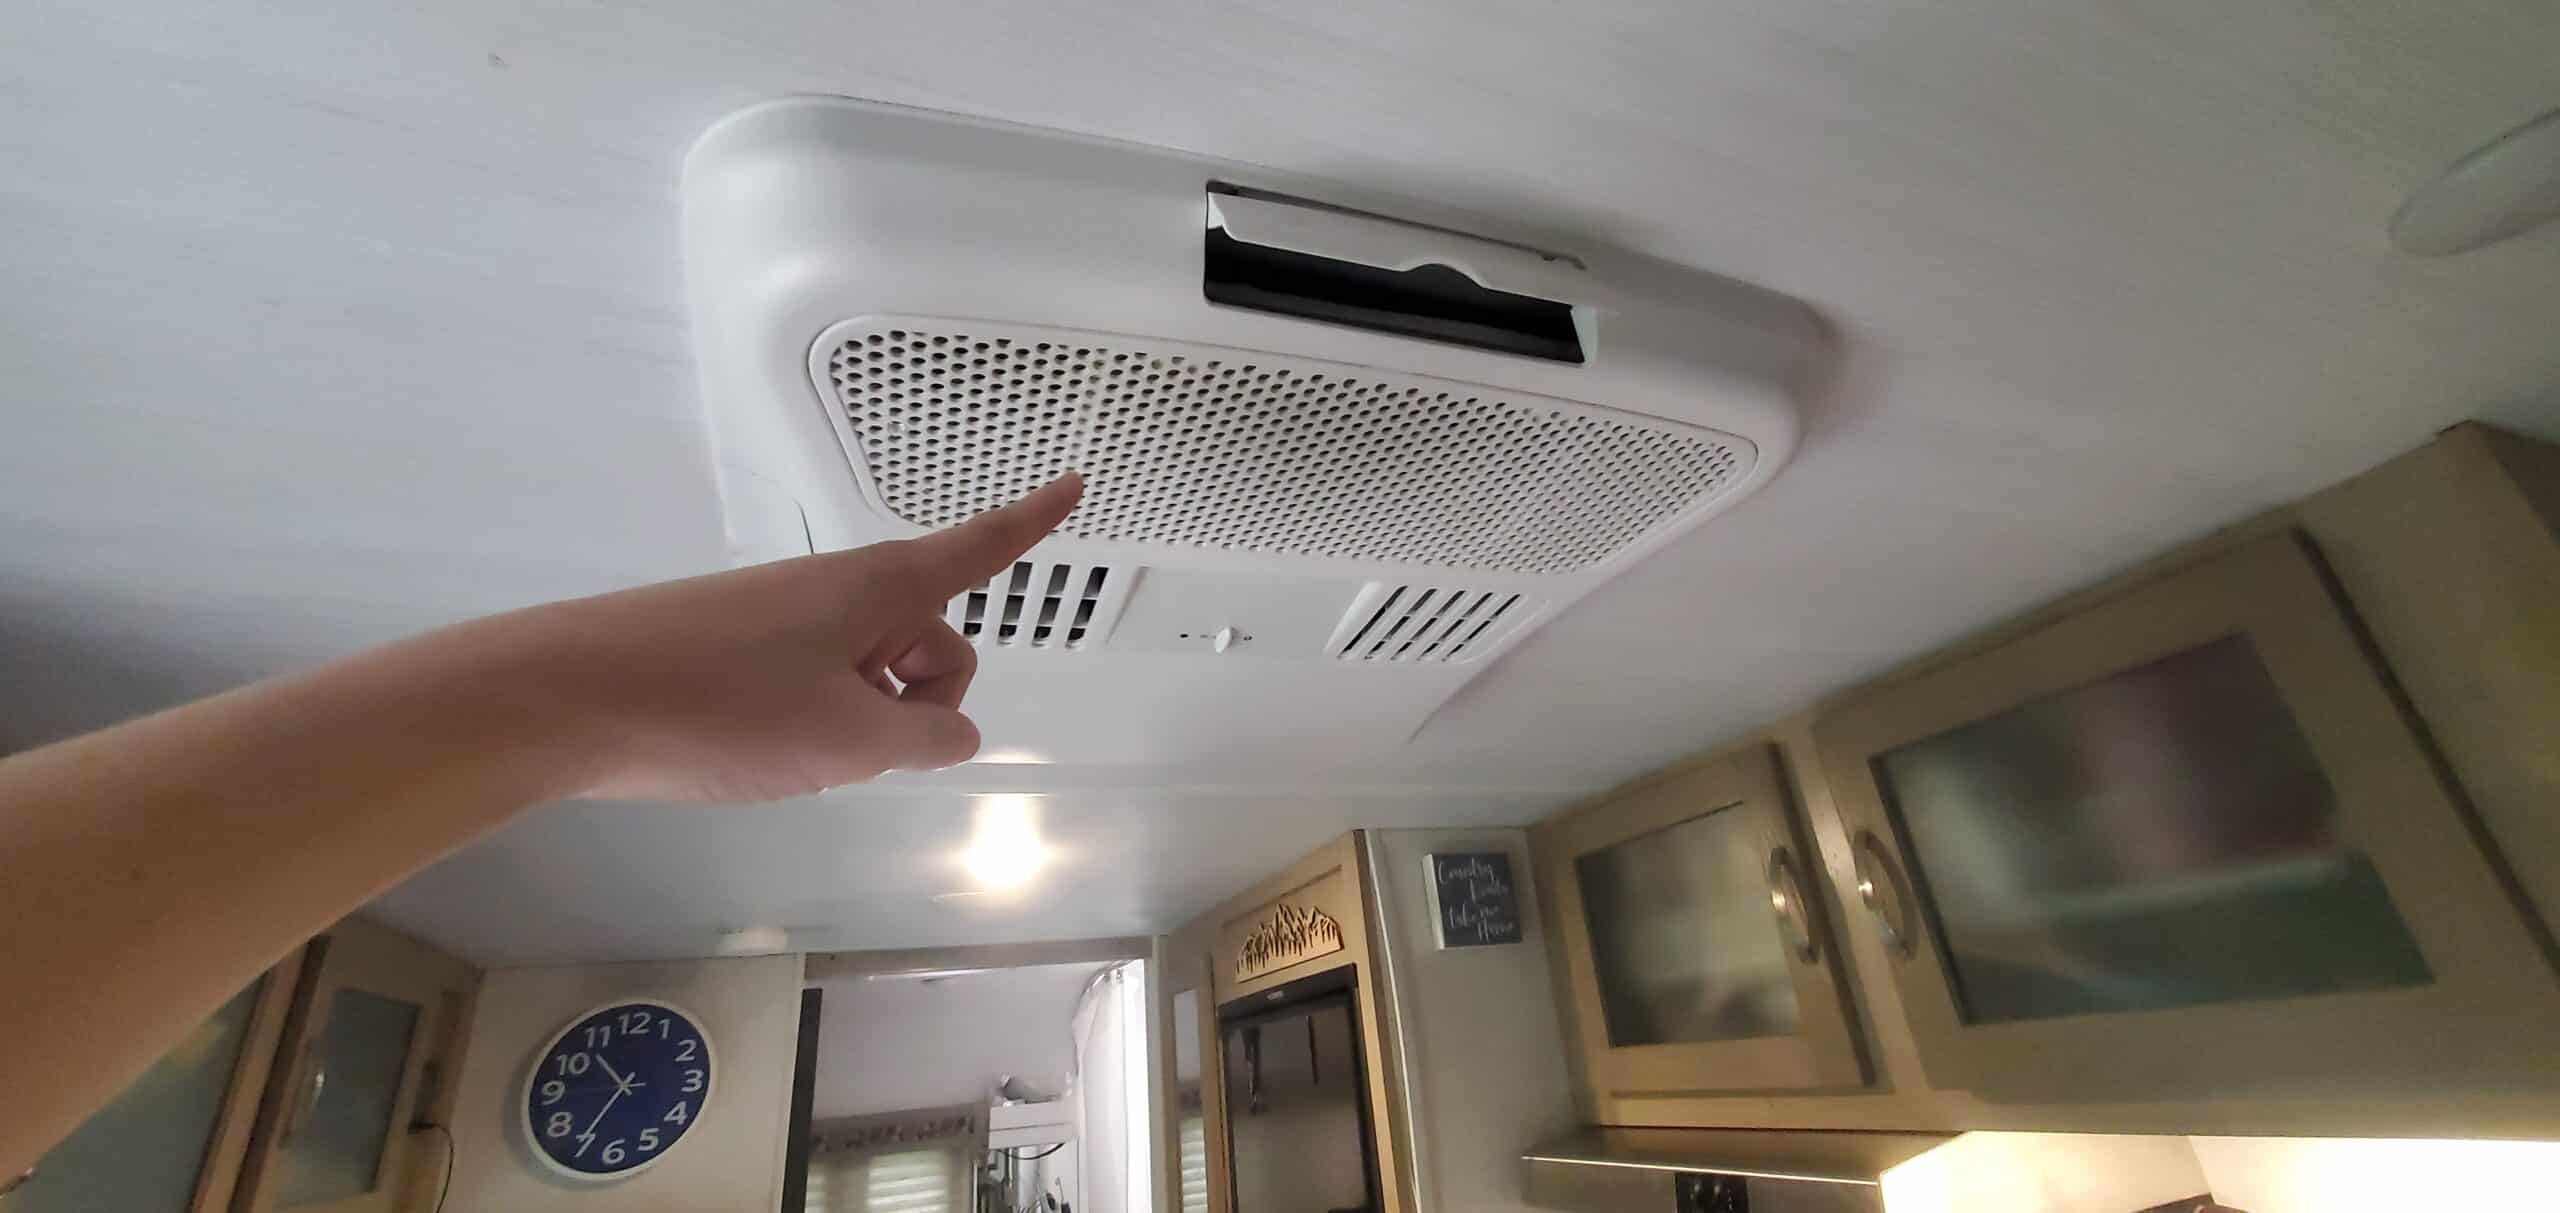 Finger pointing at rooftop RV AC filter